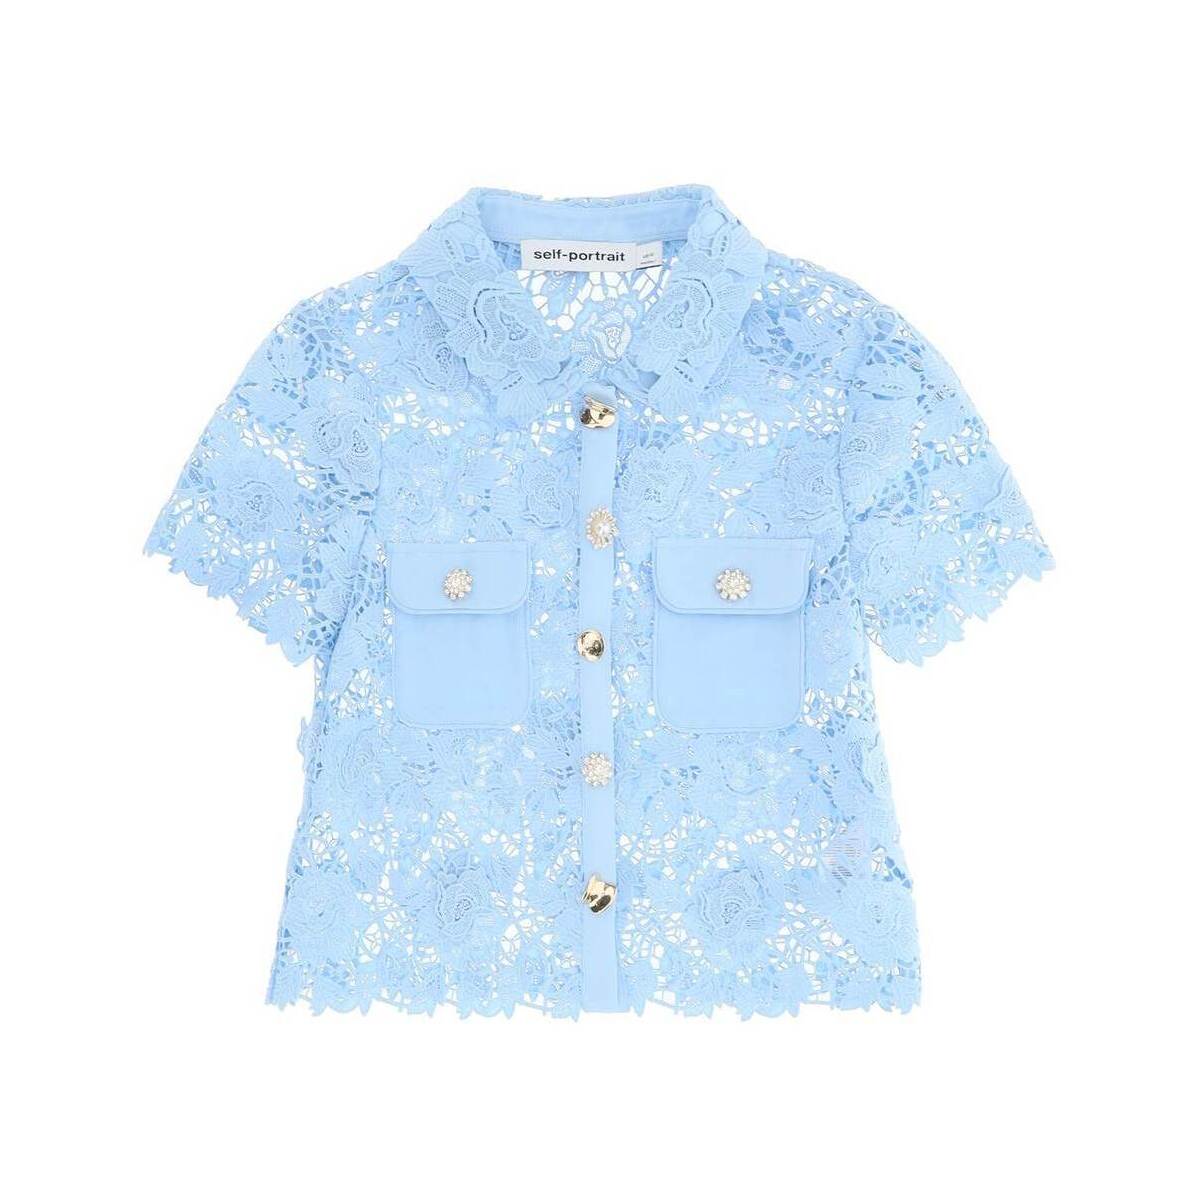 SELF PORTRAIT セルフ ポートレート ブルー Celeste Self portrait floral lace top with diamante buttons トップス レディース 春夏2024 RS24 128T BL 【関税・送料無料】【ラッピング無料】 ik